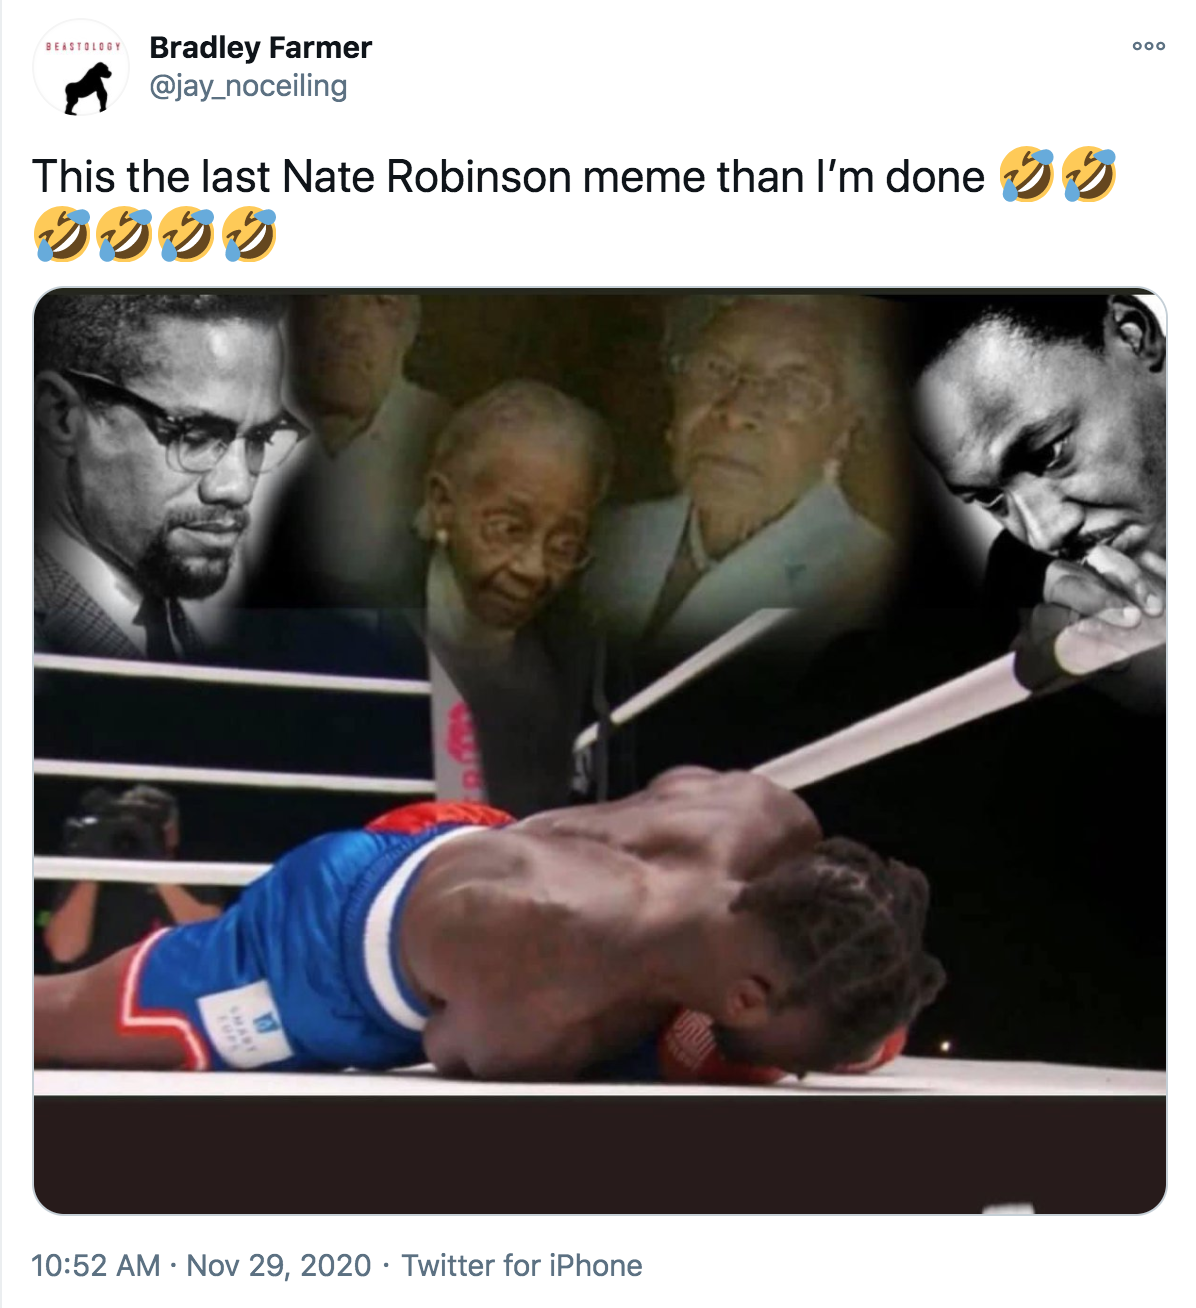 Nate Robinson KO memes - dr martin luther king jr This the last Nate Robinson meme than I'm done . Twitter for iPhone